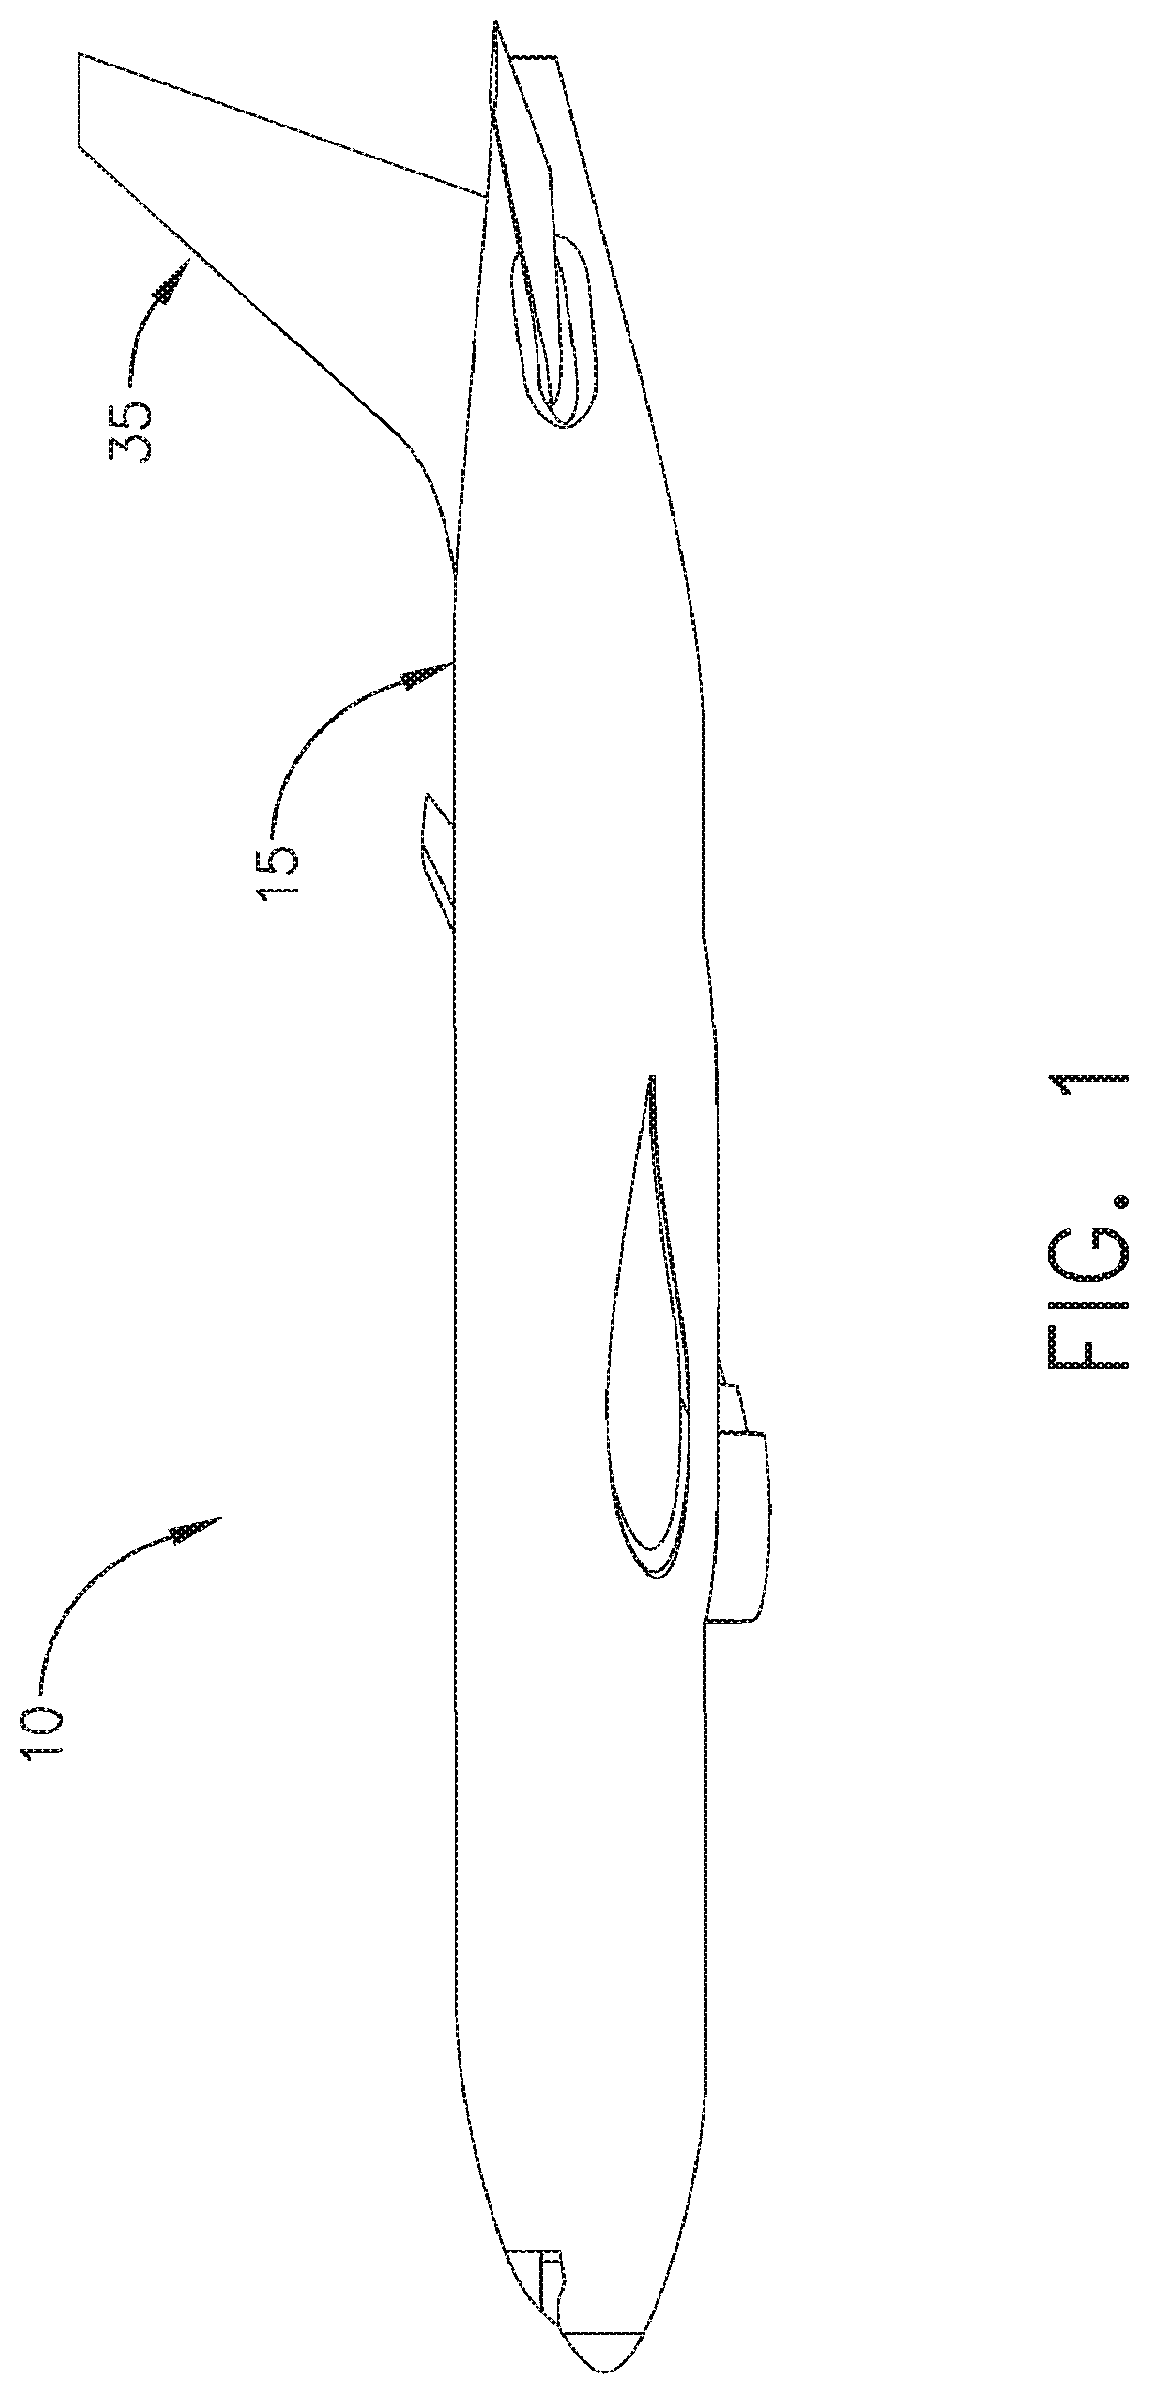 Method and System for Coupling a Vertical Stabilizer to an Aircraft Fuselage